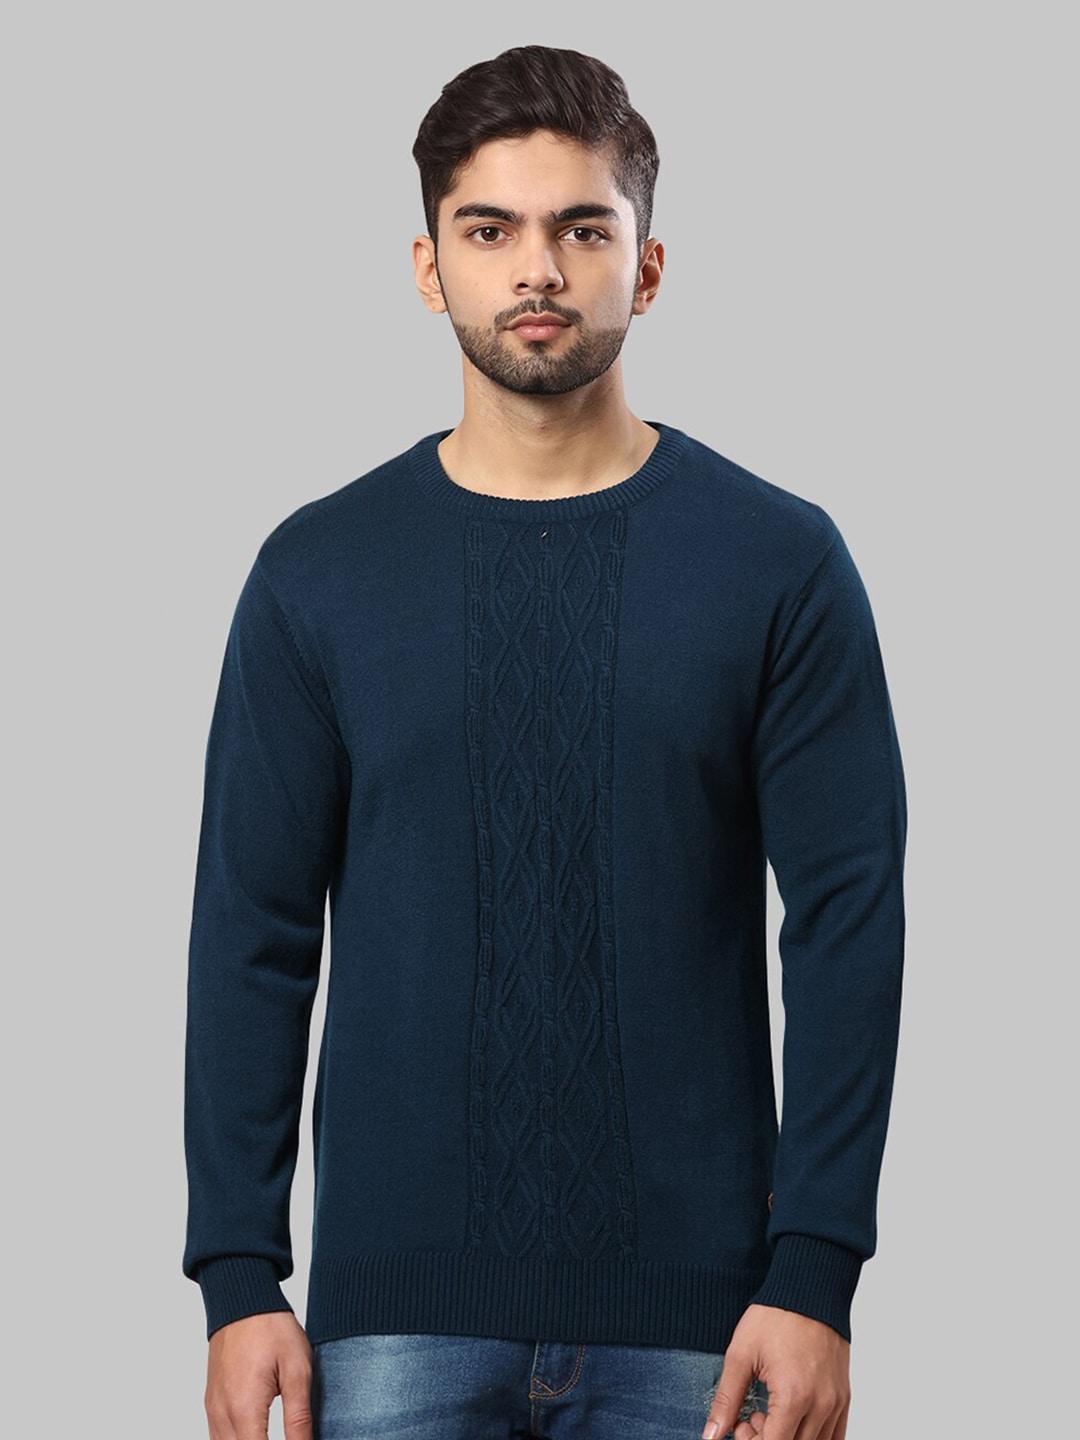 raymond-men-blue-cable-knit-pullover